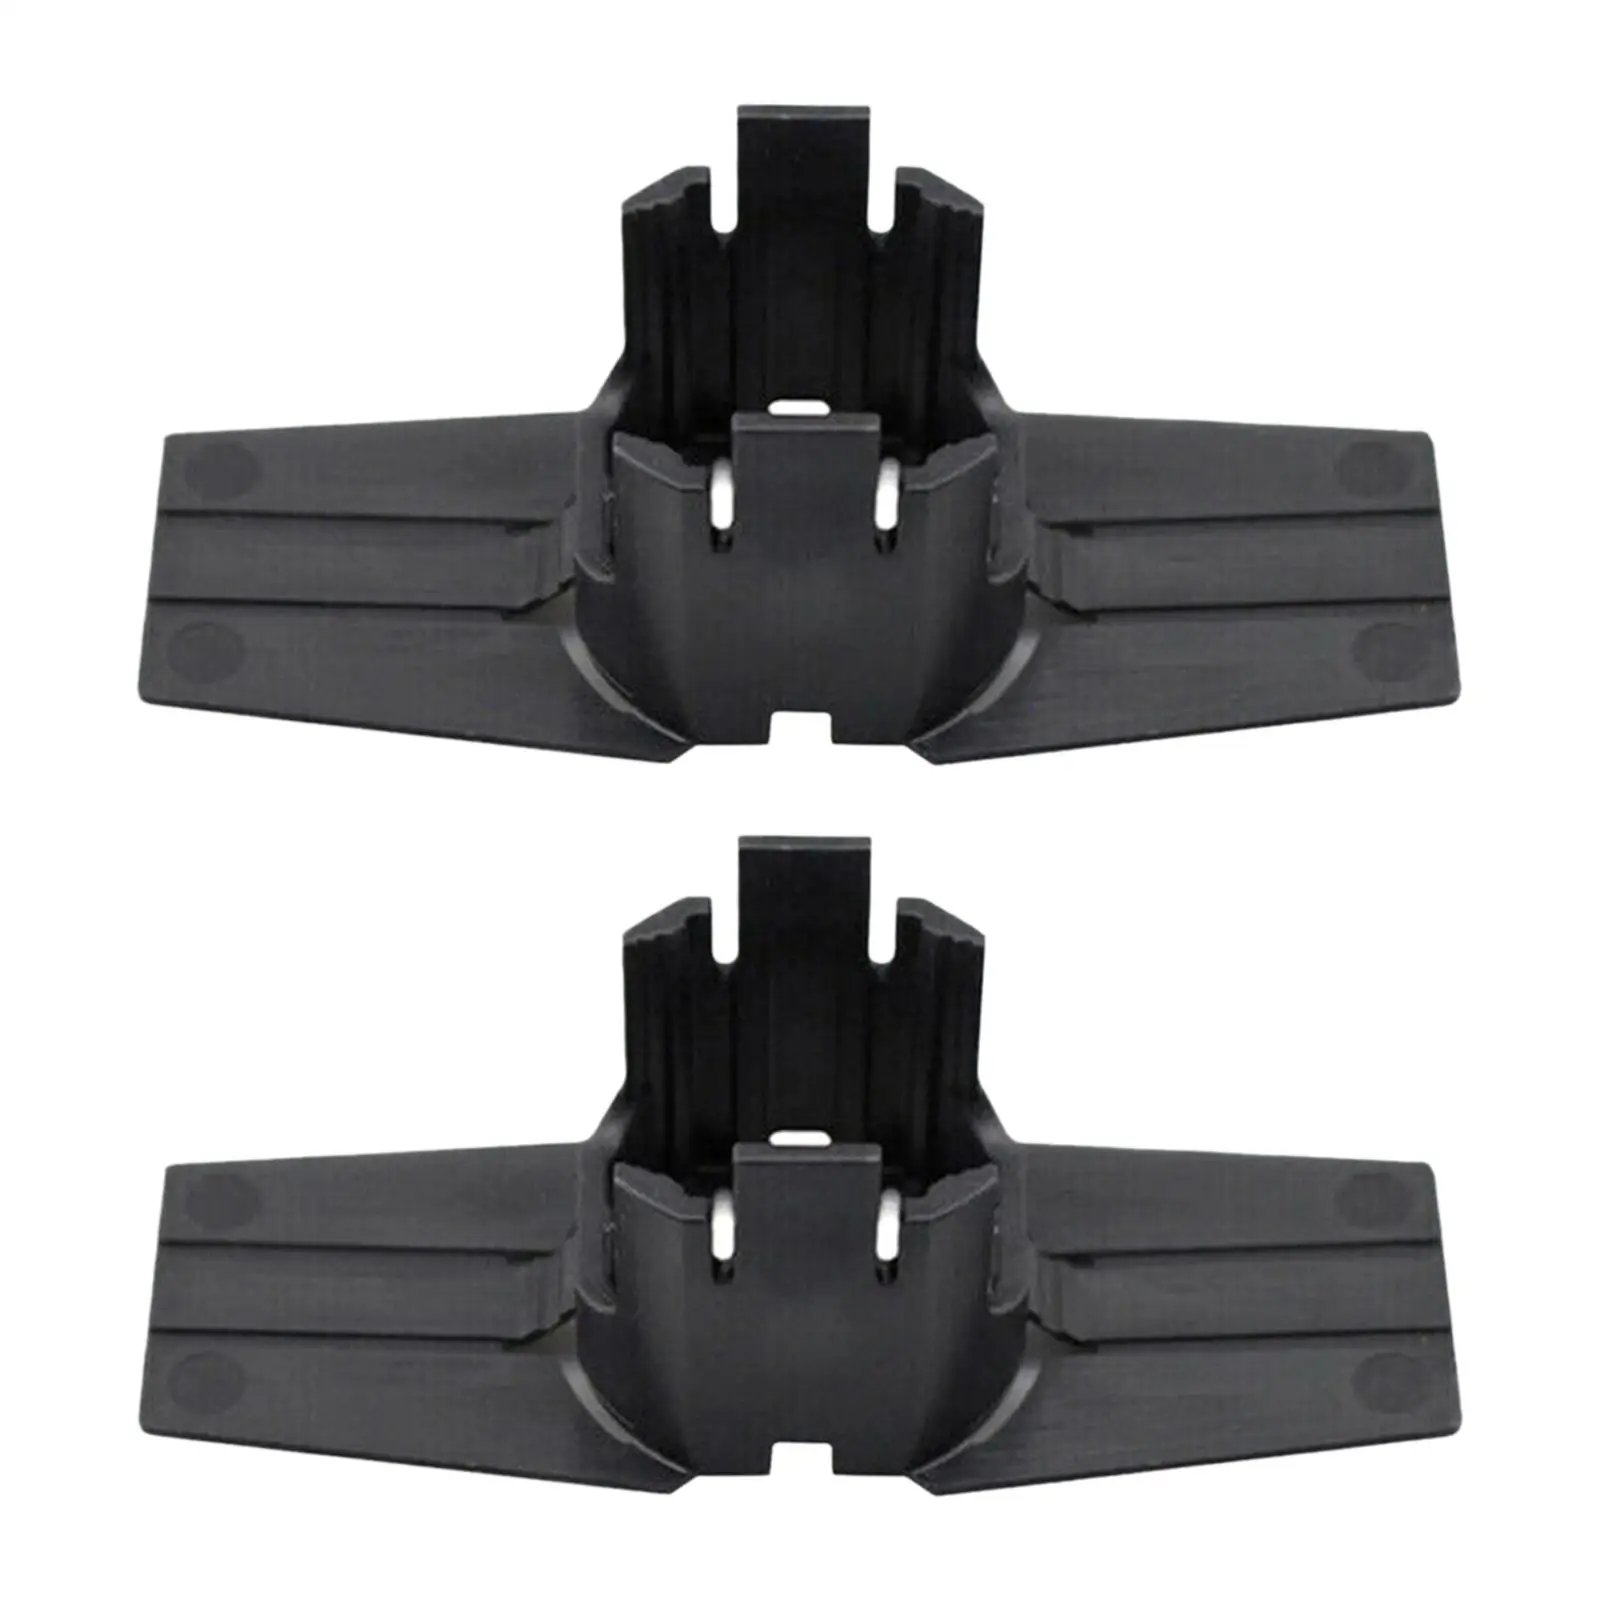 2x Parking Bracket cover Replaces Accessory, High Performance Black for 285335ZA0A Q70